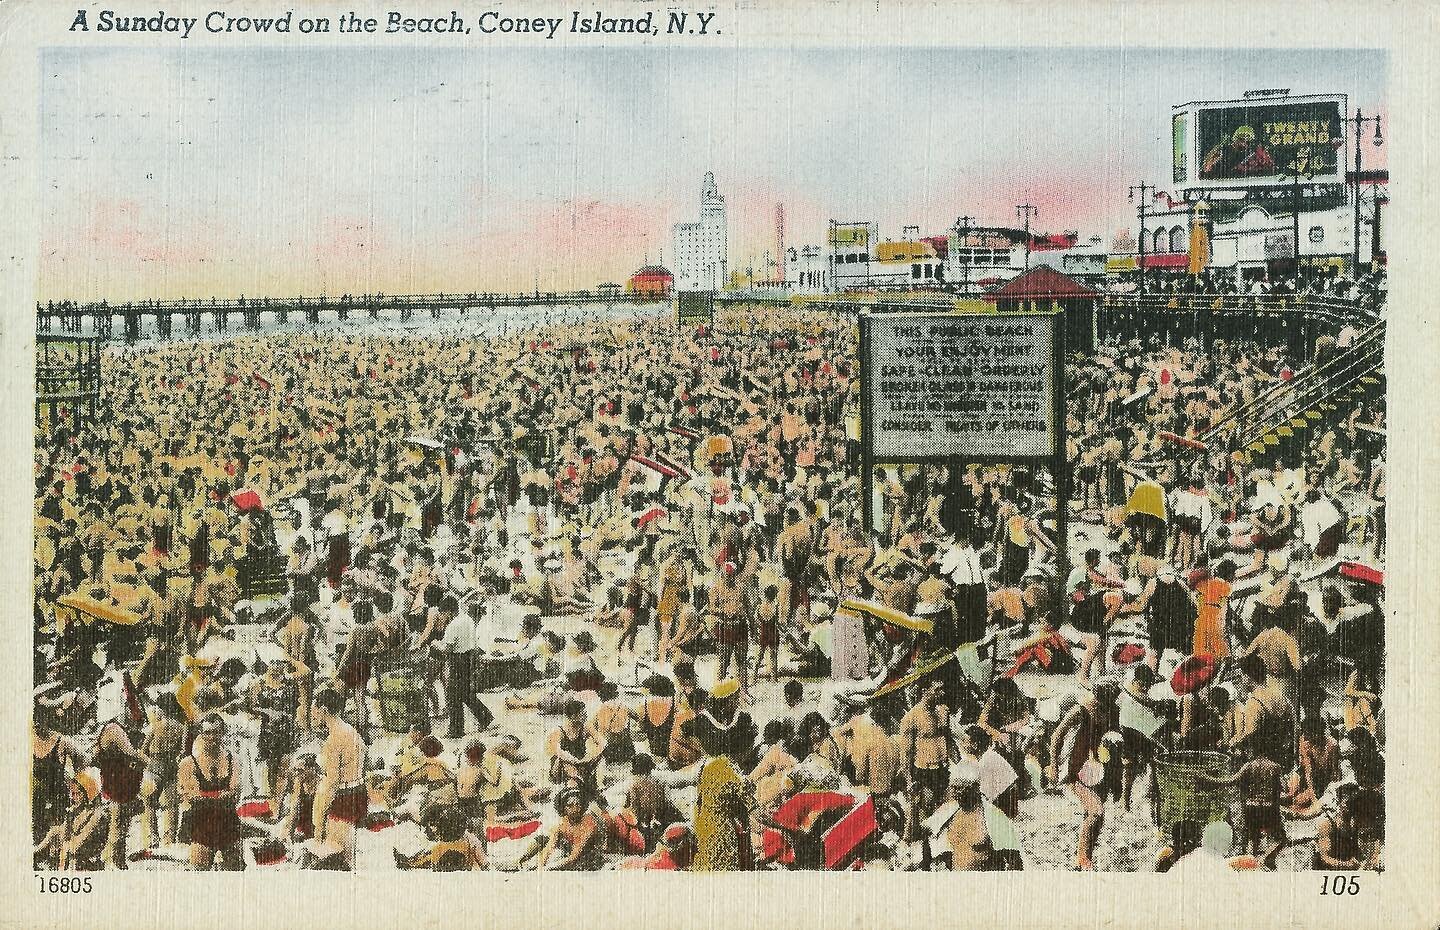 On this dark and gloomy October 1st, a bright and sunny postcard featuring a beautiful Coney Island beach day. Keep those warm thoughts close to your heart! #coneyislandusa #coneyisland #coneyislandfun #coneyislandbeach #coneyislandboardwalk #coneyis